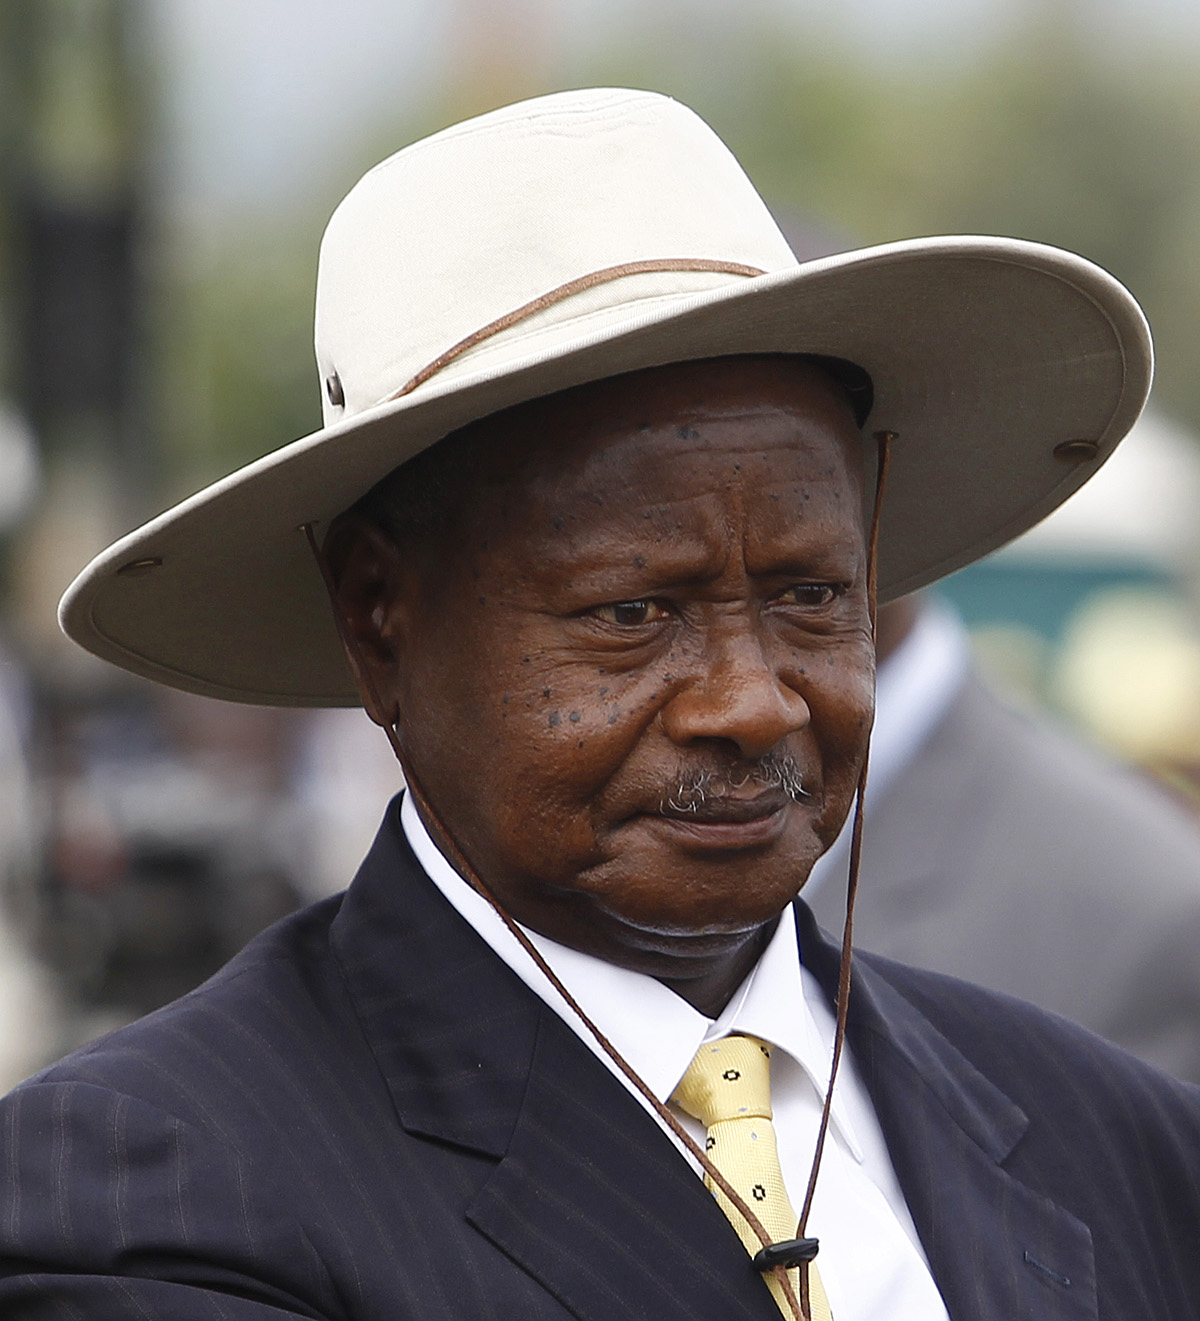 Uganda's President Yoweri Museveni arrives for an anniversary parade in Kasese town, 497km (309 miles) west of Uganda's capital Kampala, January 30, 2013. The parade marks 27 years since the National Resistance Army (NRA) took over power, following a